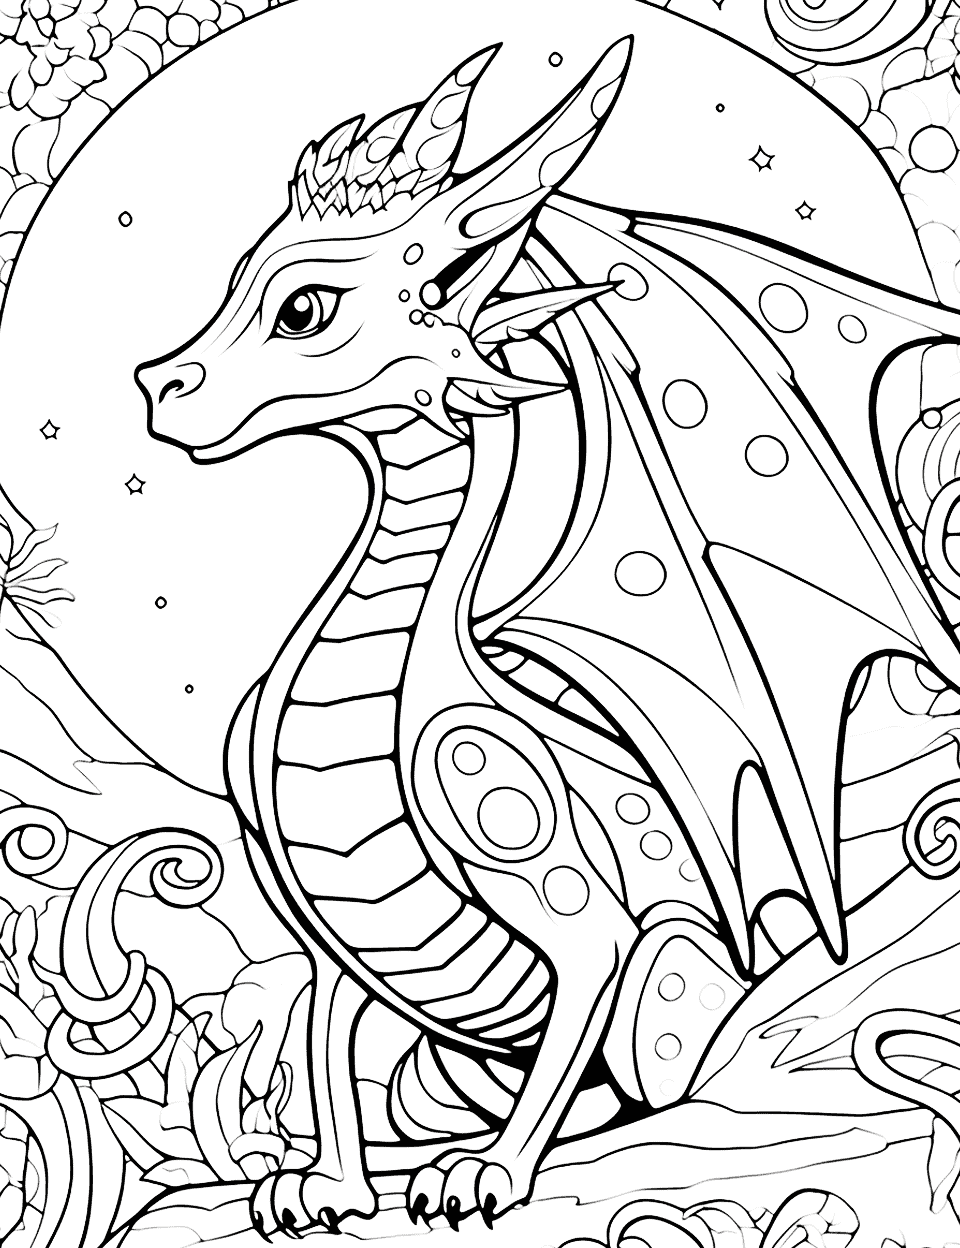 Majestic Dragon's Lair Adult Coloring Page - A detailed scene of a dragon in its lair with a galaxy twist.